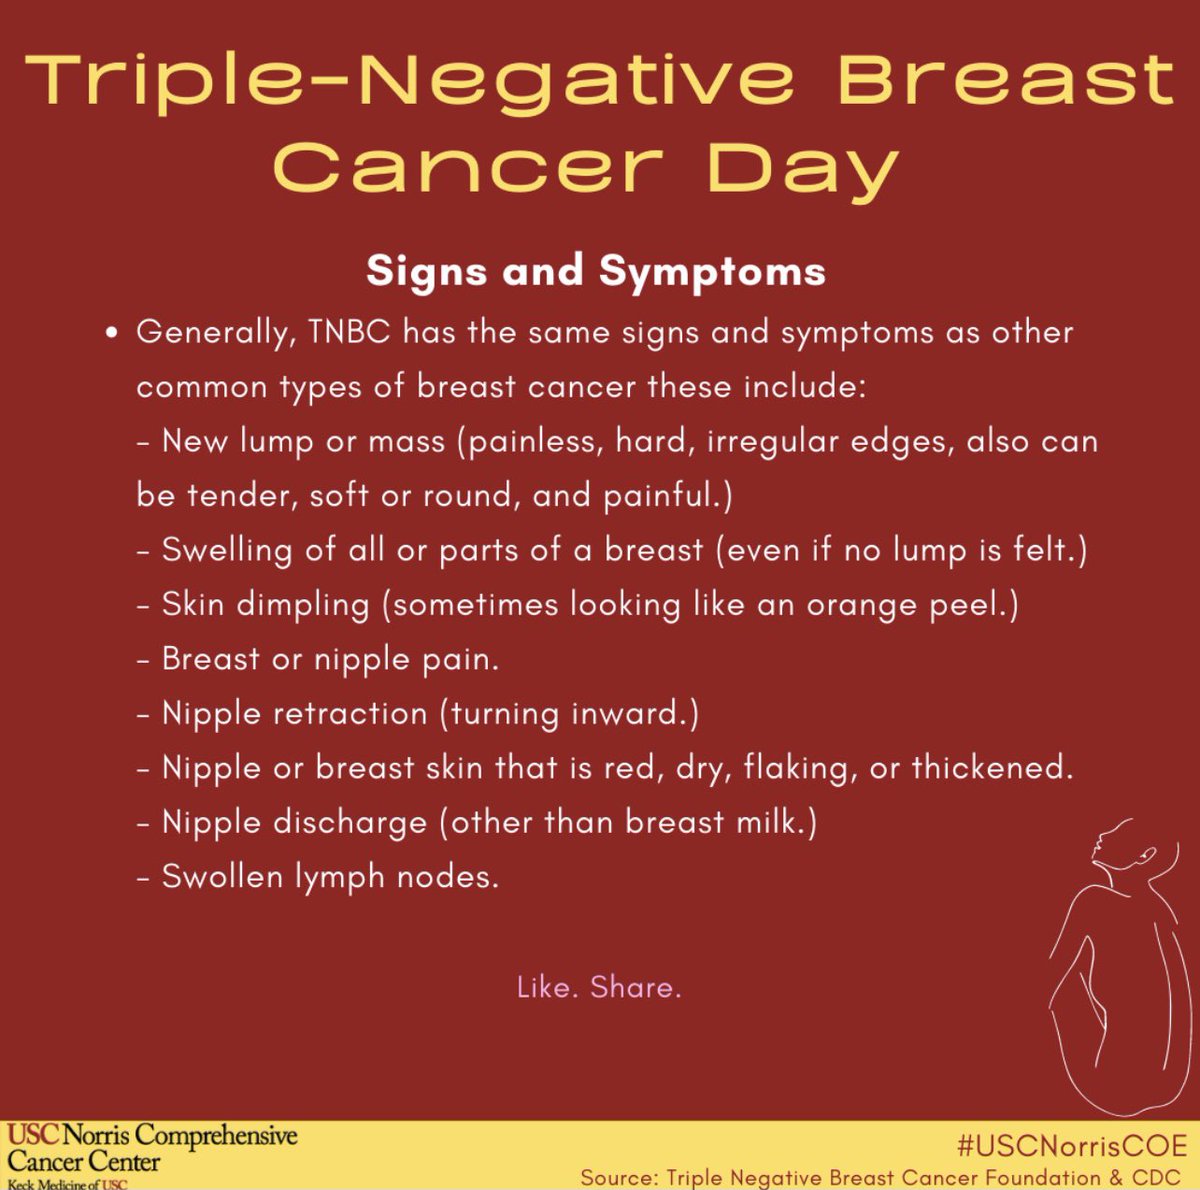 March 3 is Triple Negative Breast Cancer Awareness Day.⁣
⁣
For more information, please visit: cdc.gov/cancer/breast/…⁣
⁣
#TNBCF ⁣
#TNBCDay ⁣
#TripleNegativeBreastCancerDay